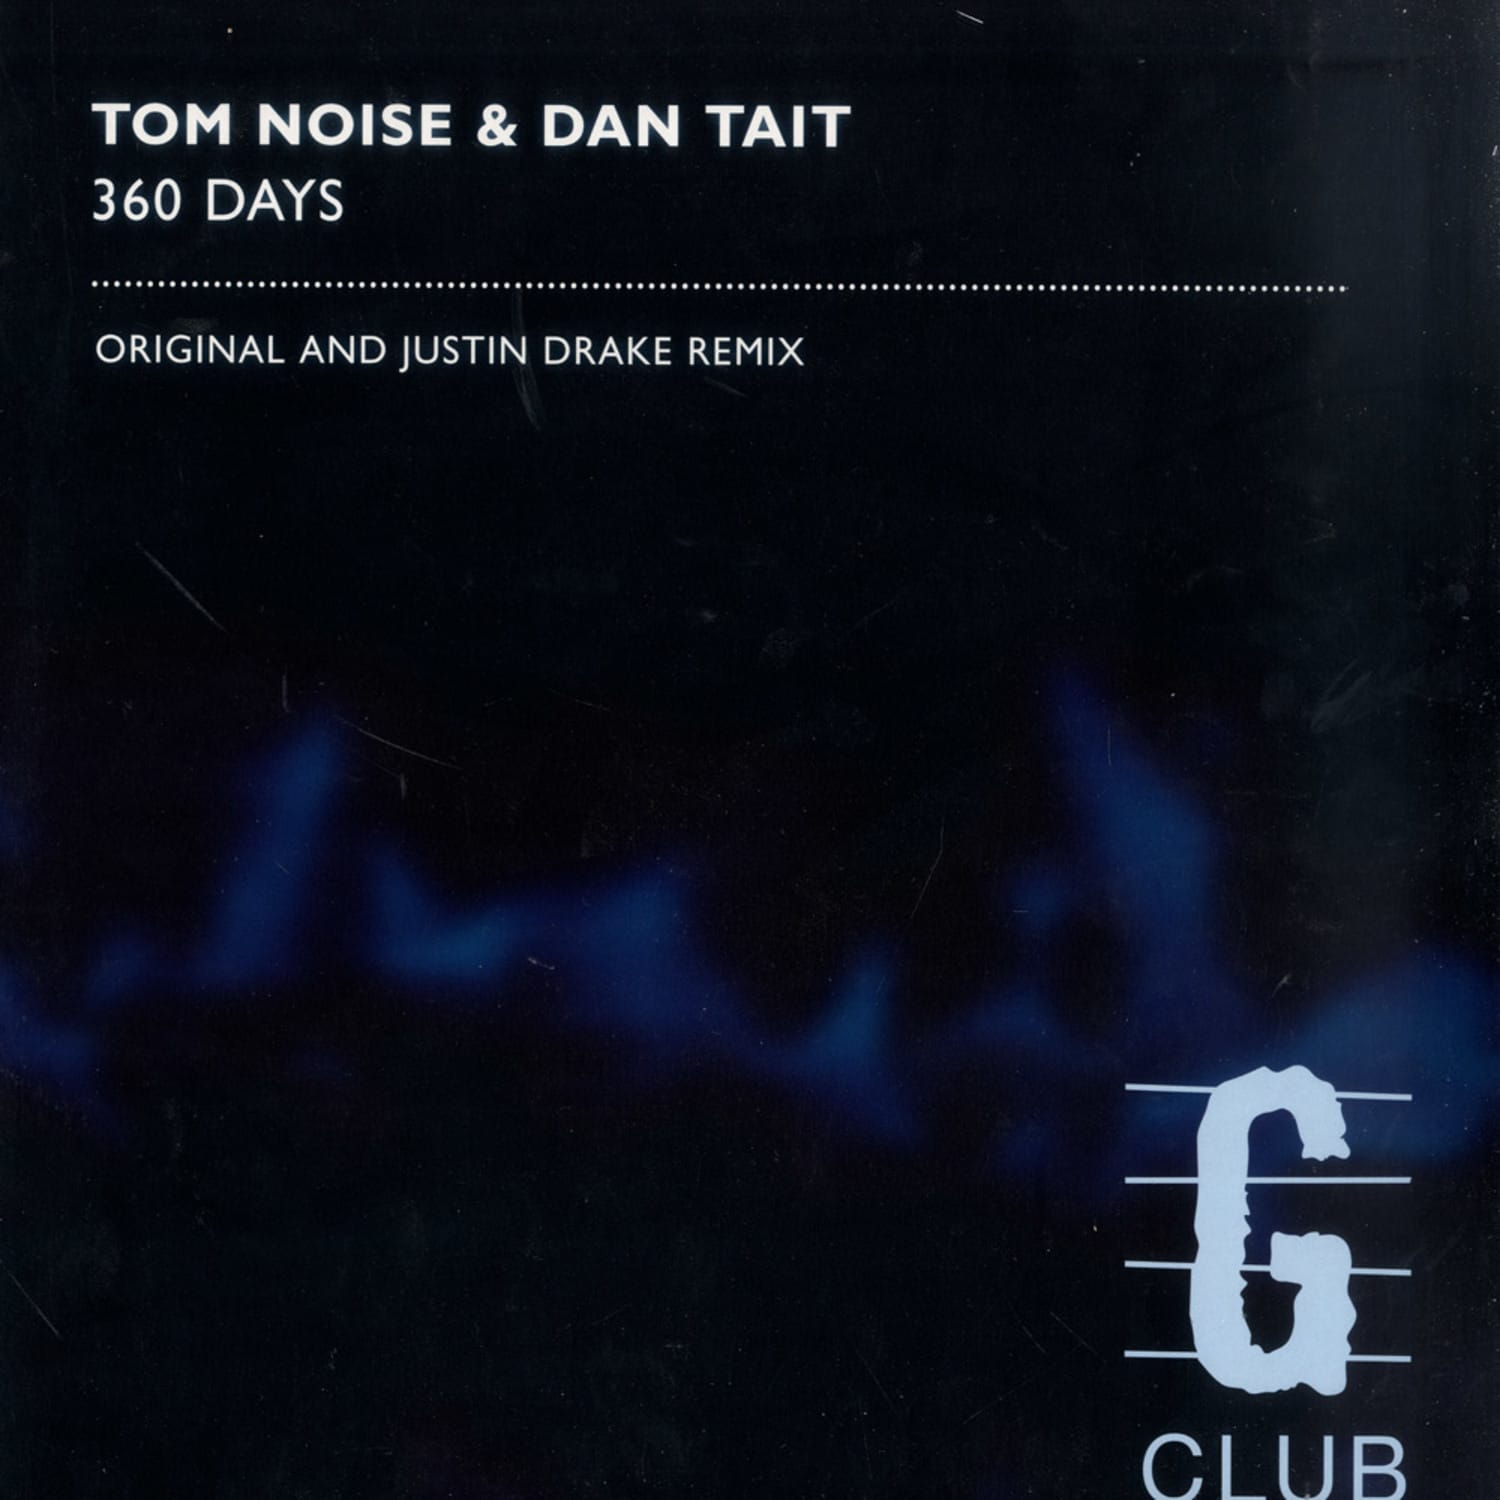 Tom Noise and Dan Tait - 360 DAYS